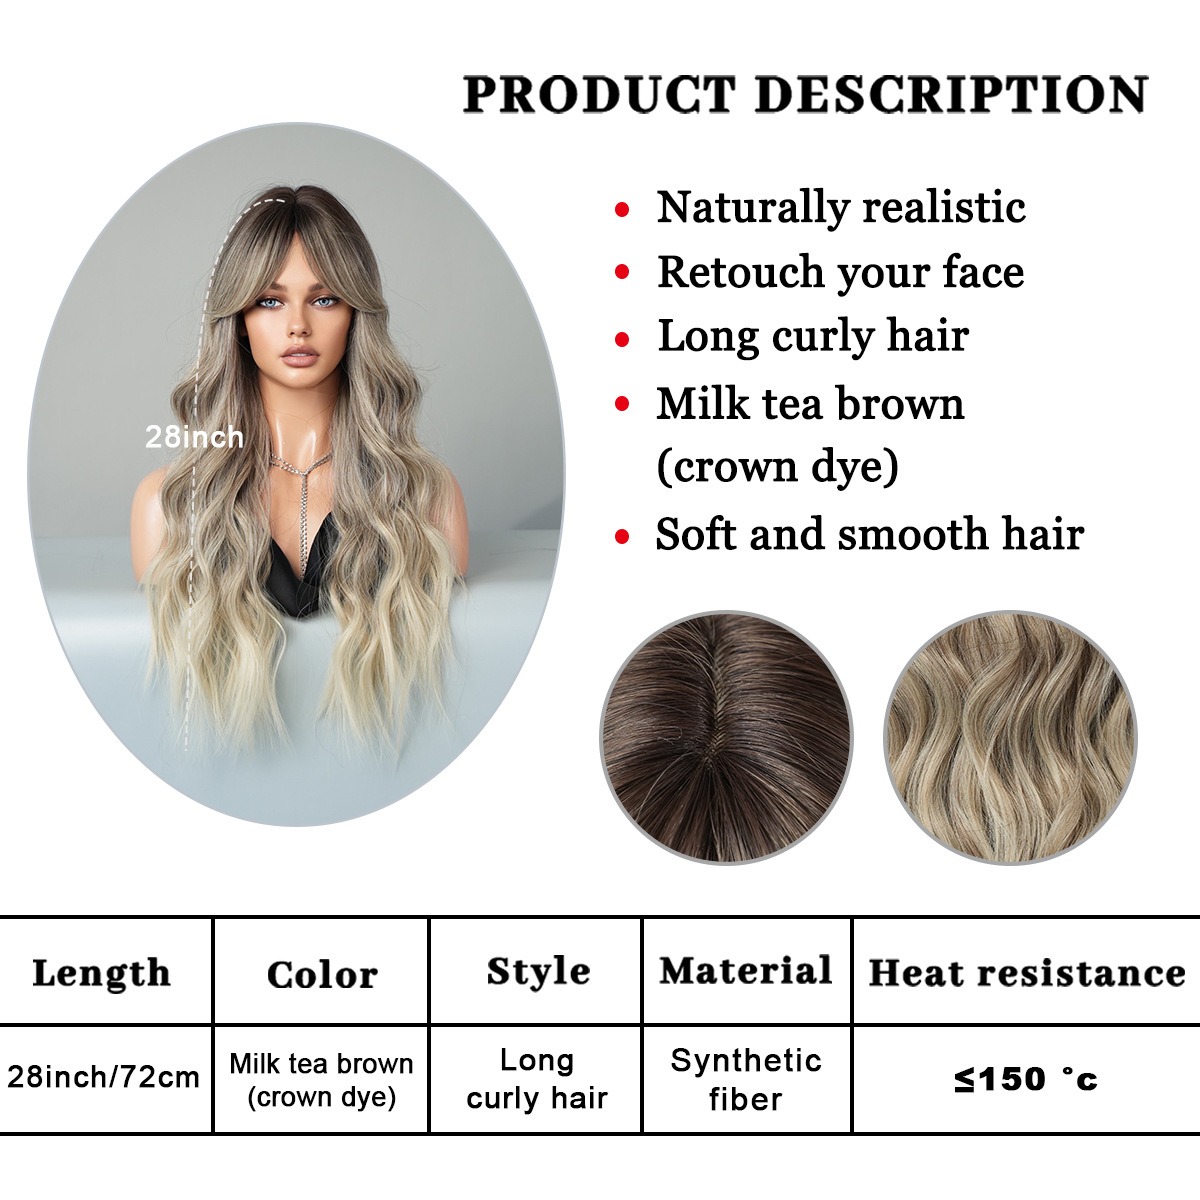 A fashionable synthetic wig in milk tea brown featuring long curly hair and female bangs